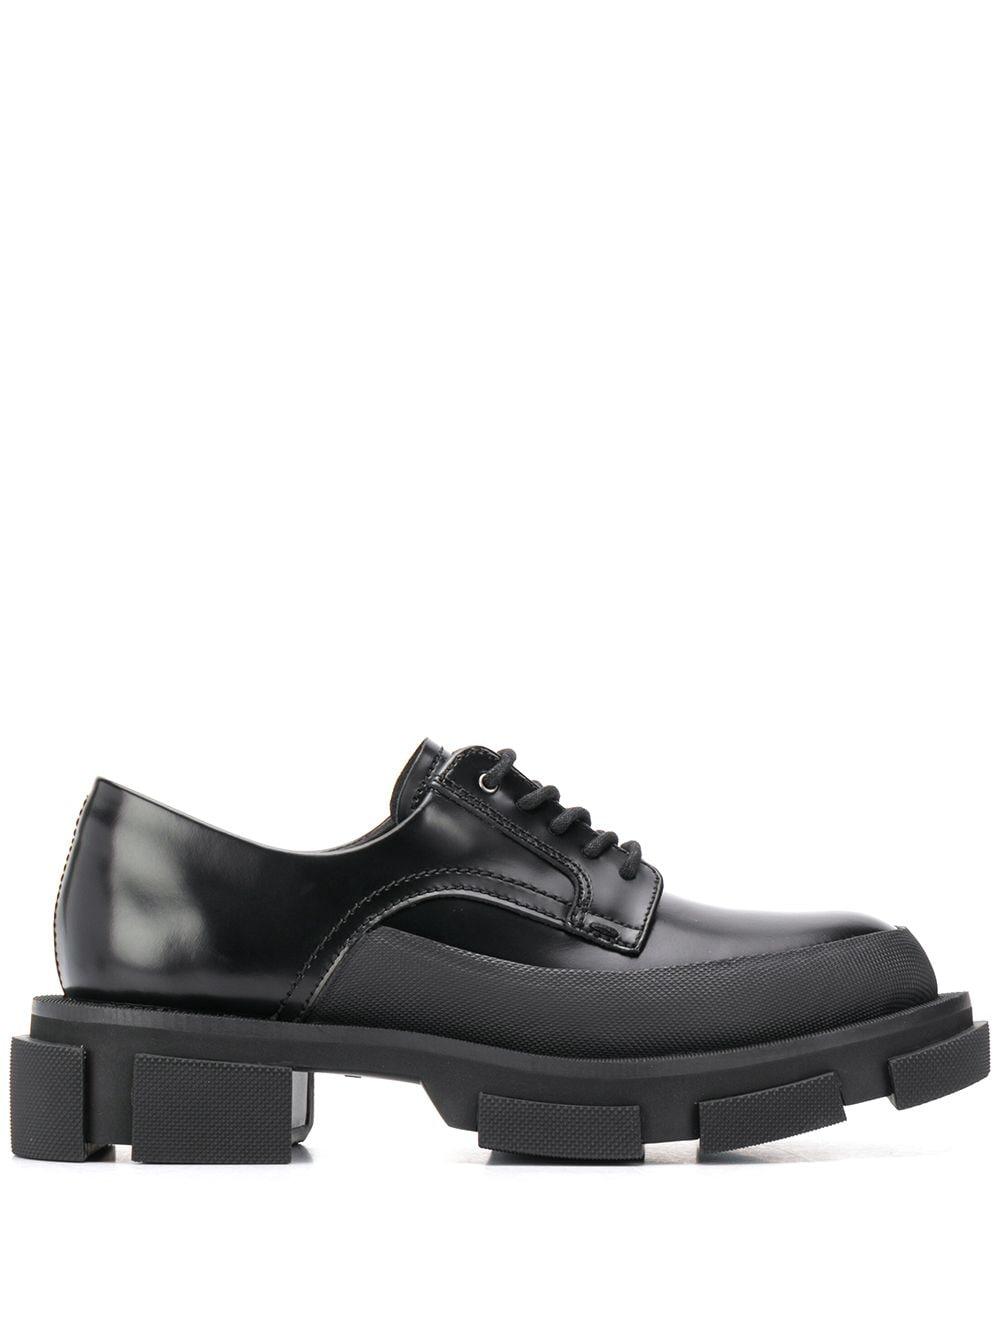 BOTH Paris Leather Gao Derby Shoes in Black | Lyst